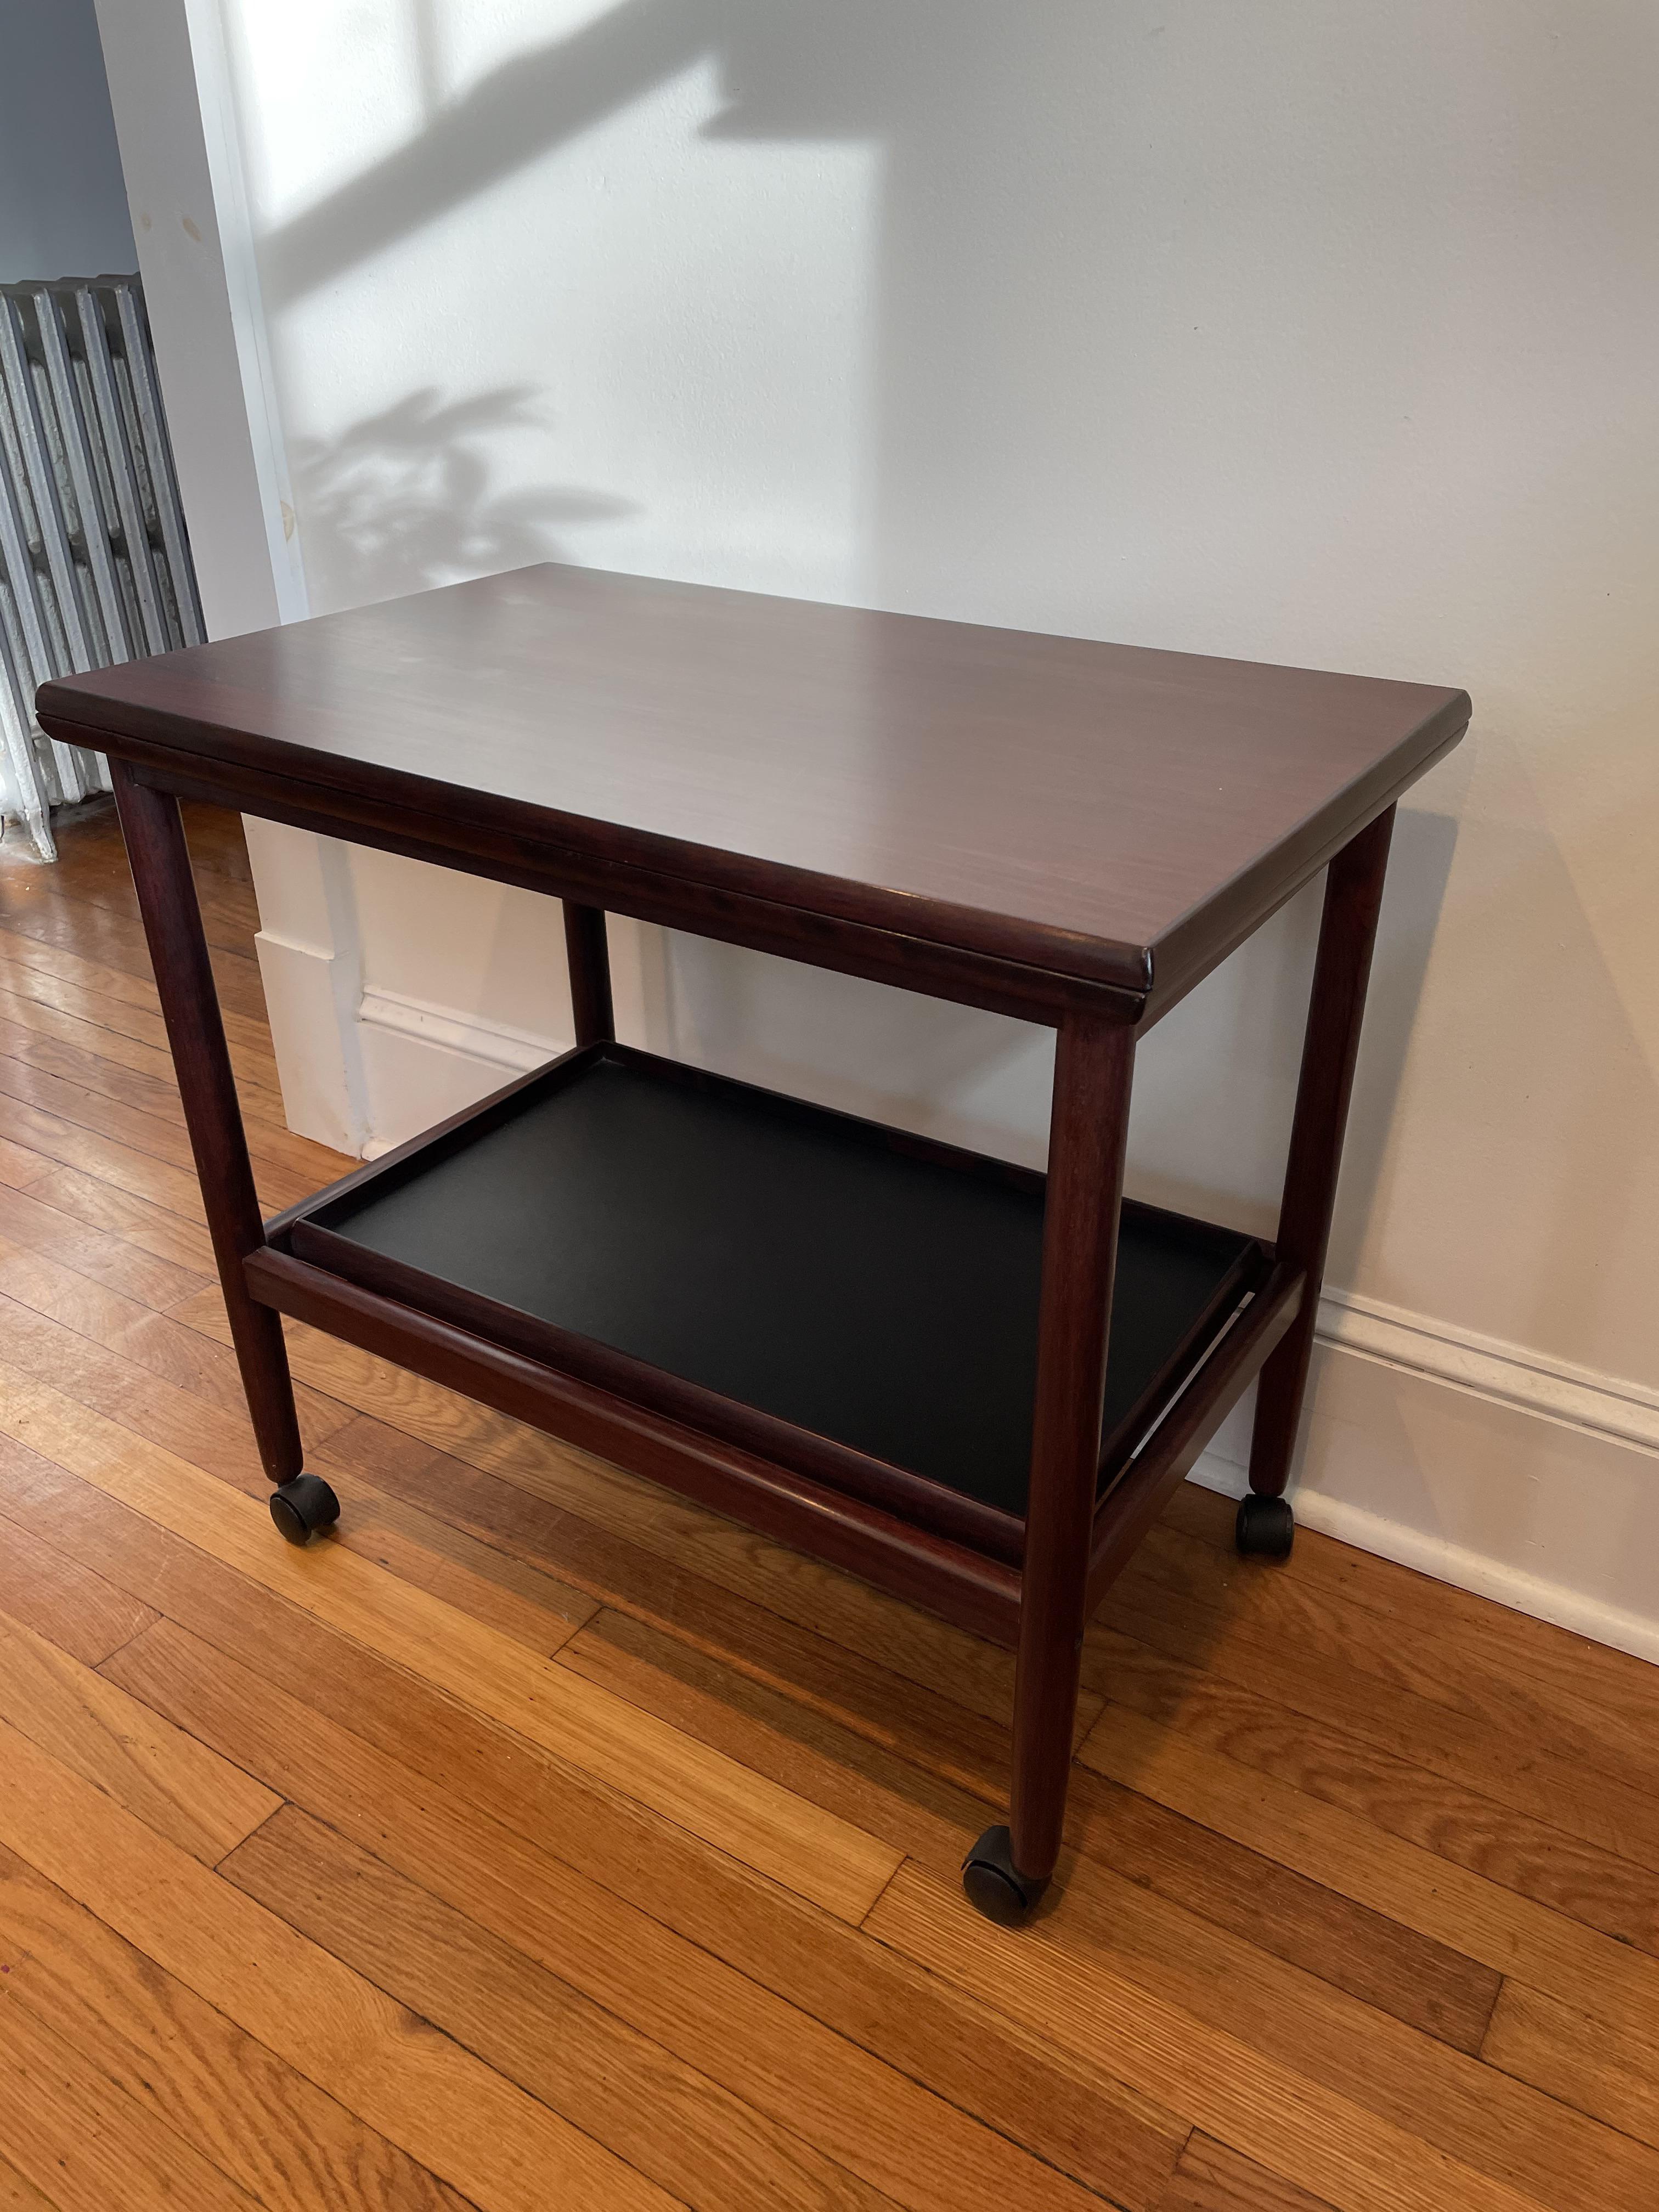 Grete Jalk mid century Rosewood flip top table with removable serving tray. Swivel top allow surface space to double in size. Brass hinges. Classic Danish design set on four wheels for ease of use.
Curbside to NYC/Philly $350.